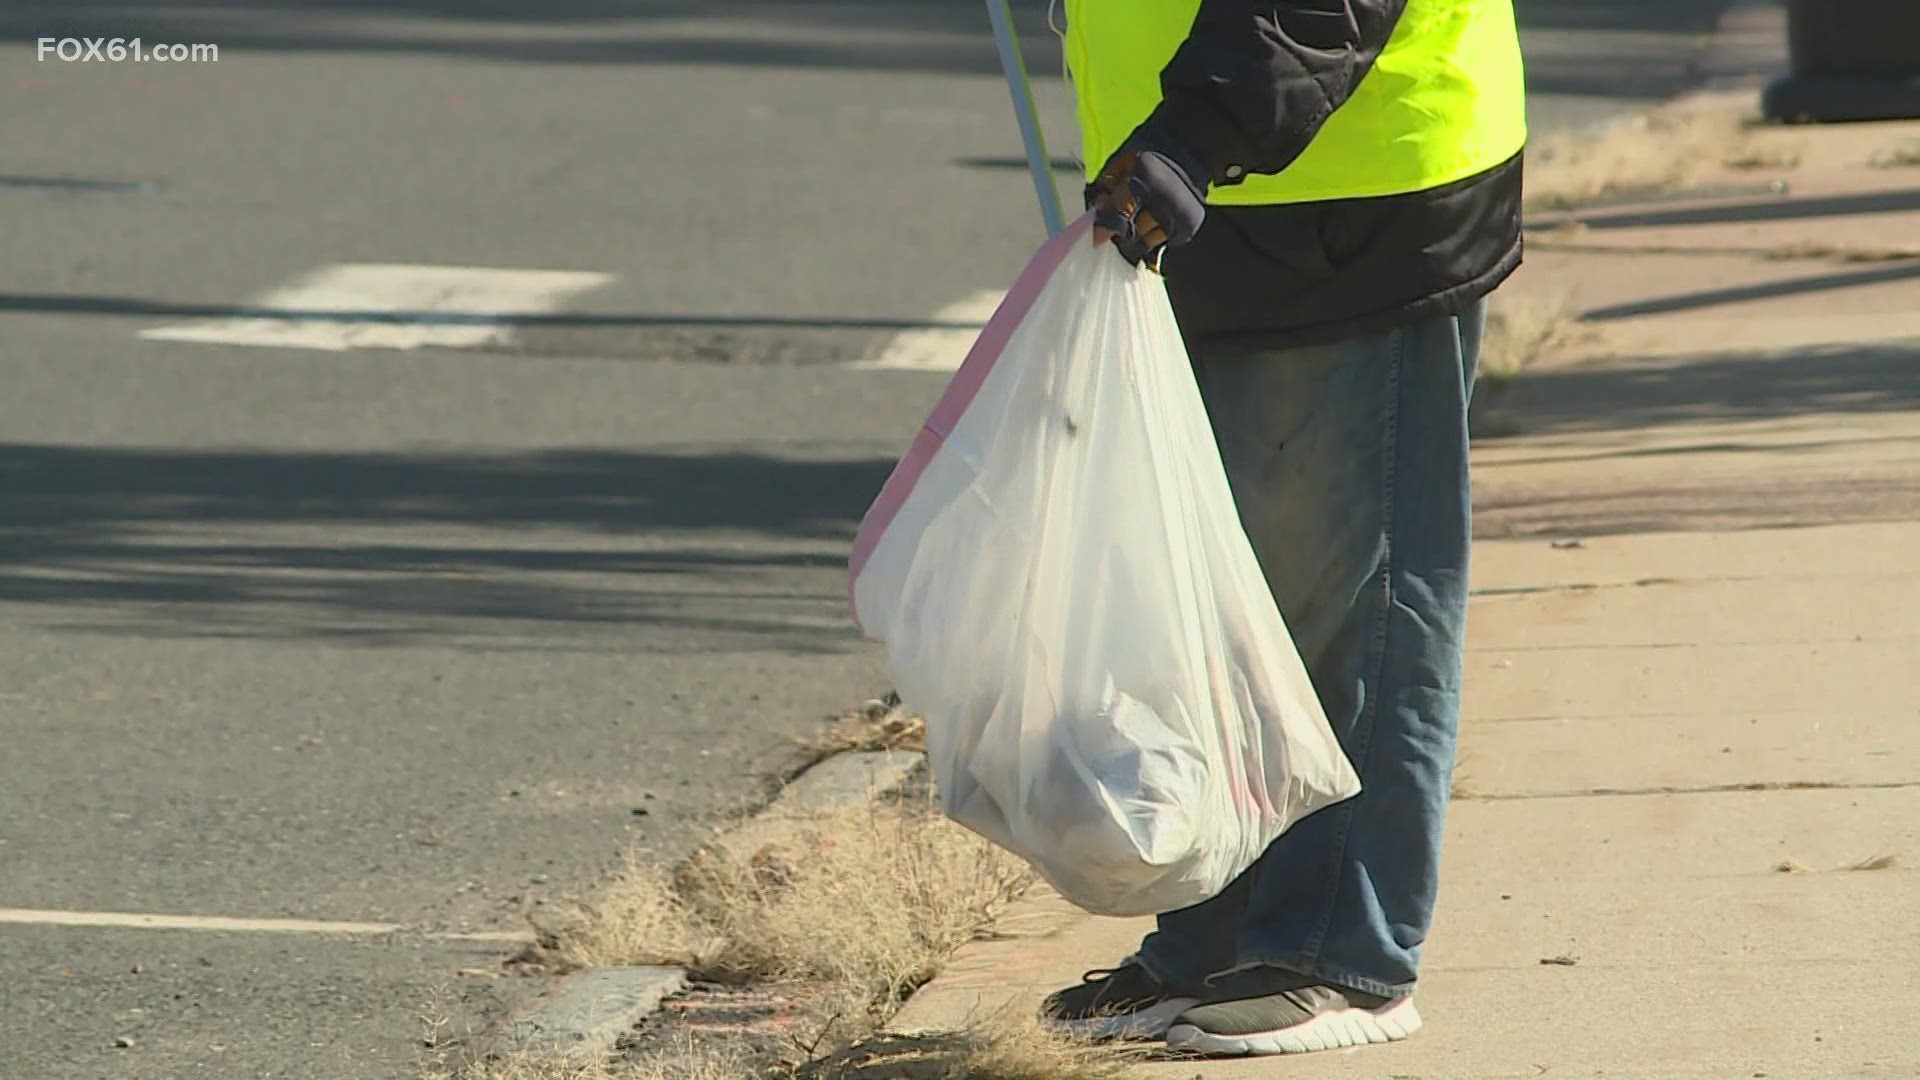 The clean-up was part of the center's "Clean Crew" initiative which promotes volunteerism in its clients. They cleaned up the Asylum Hill neighborhood.